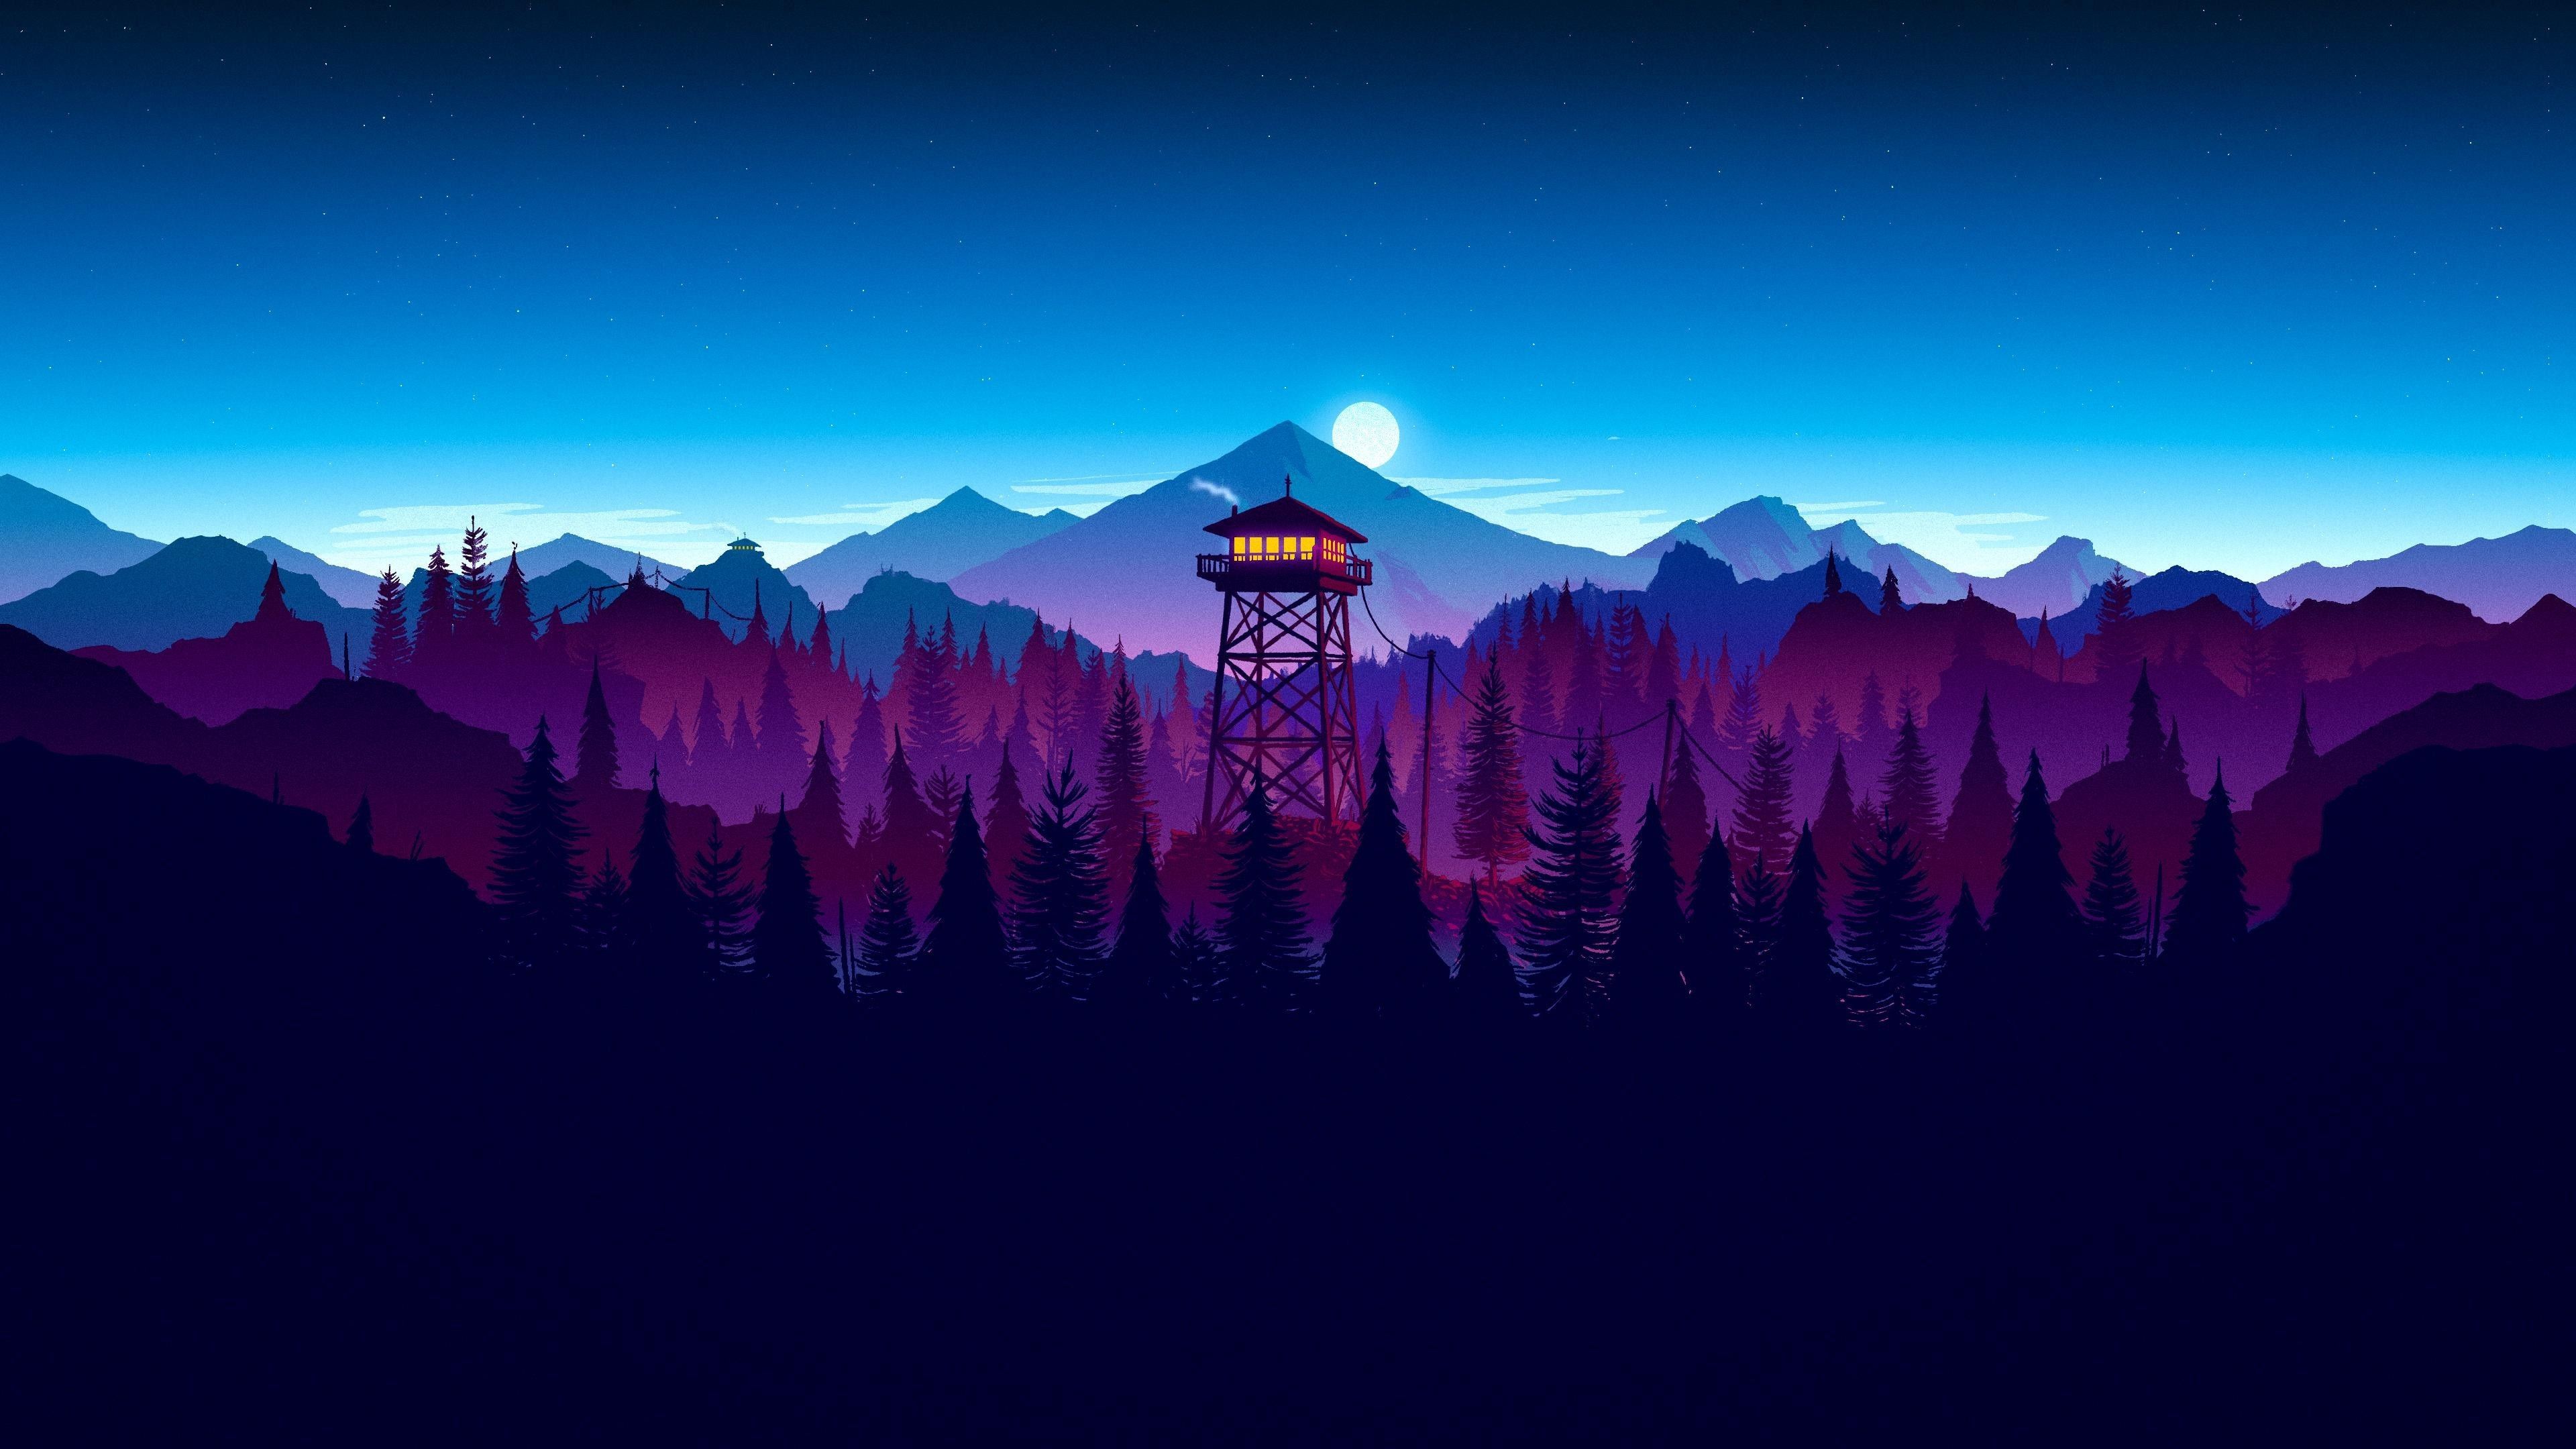 Wallpaper Watchtower, moon, mountains, forest, art picture 3840x2160 UHD 4K Picture, Image